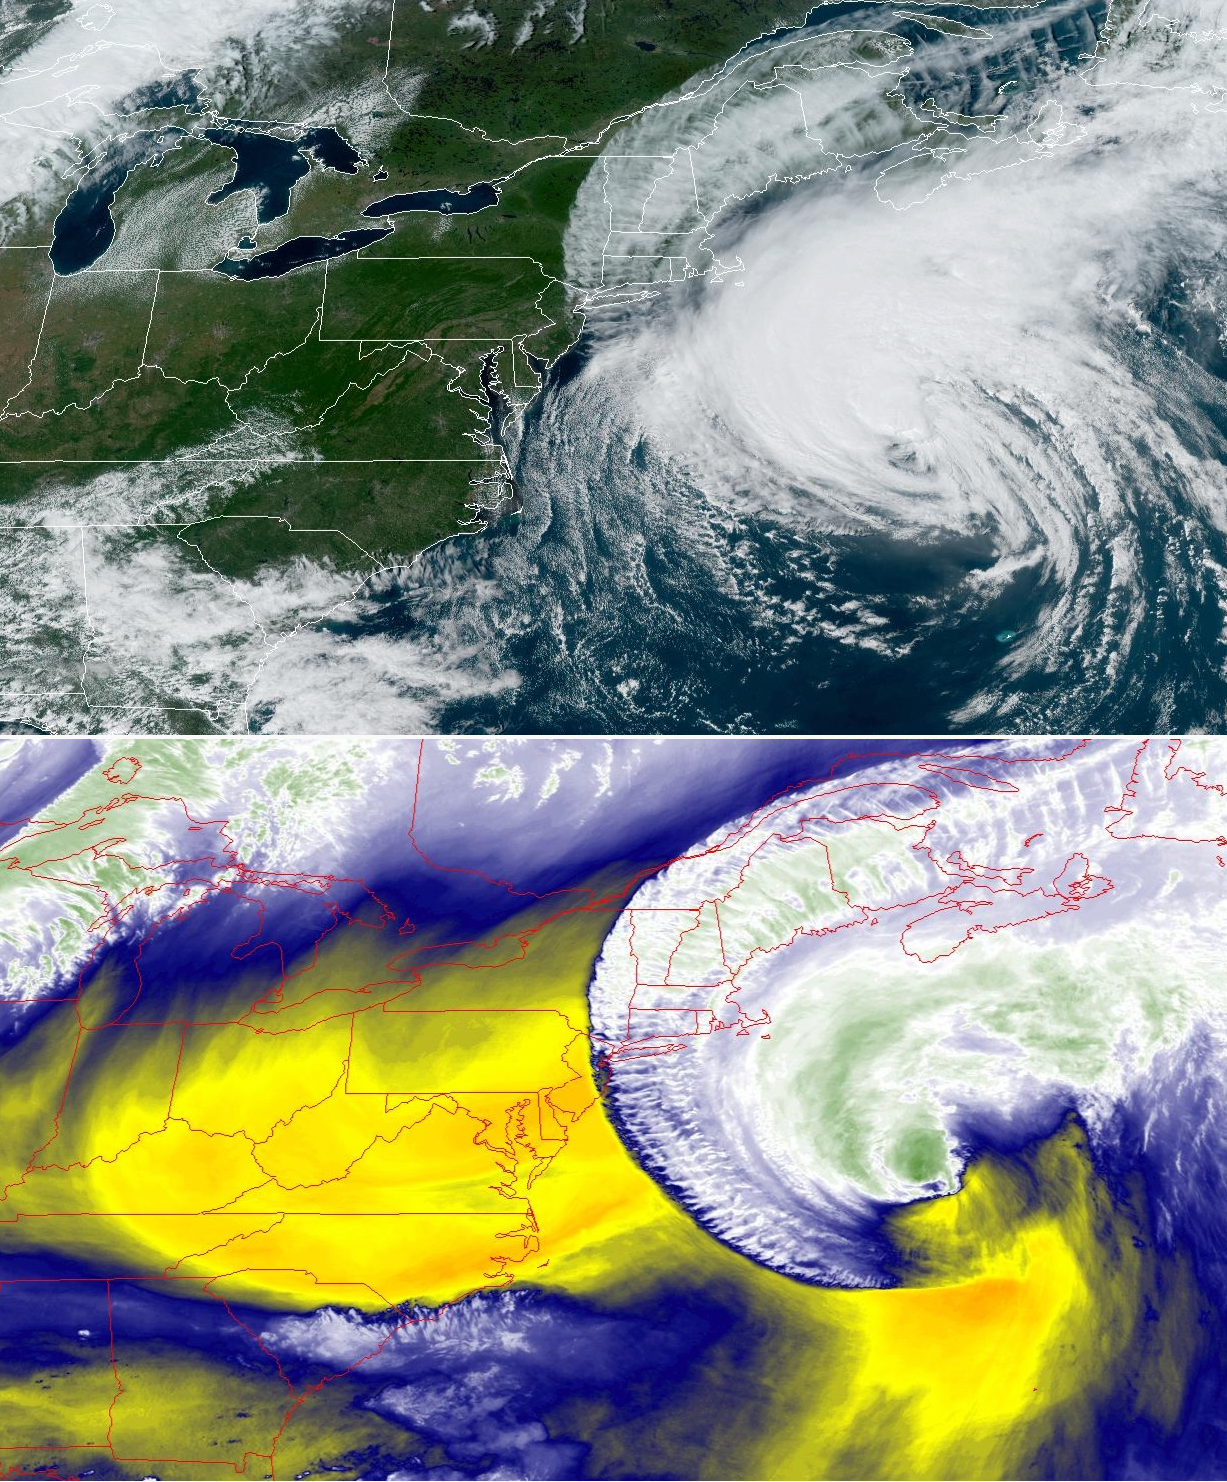 Top: NOAA GOES visible image showing Hurricane Lee off the East Coast at 2:31 PM EDT on September 15th. Bottom: NOAA GOES water vapor image at 2:31 PM EDT with the driest air as yellow/orange shades and wettest as green. Notice the dry air getting entrained into Lee, contributing to a weakening of the storm.